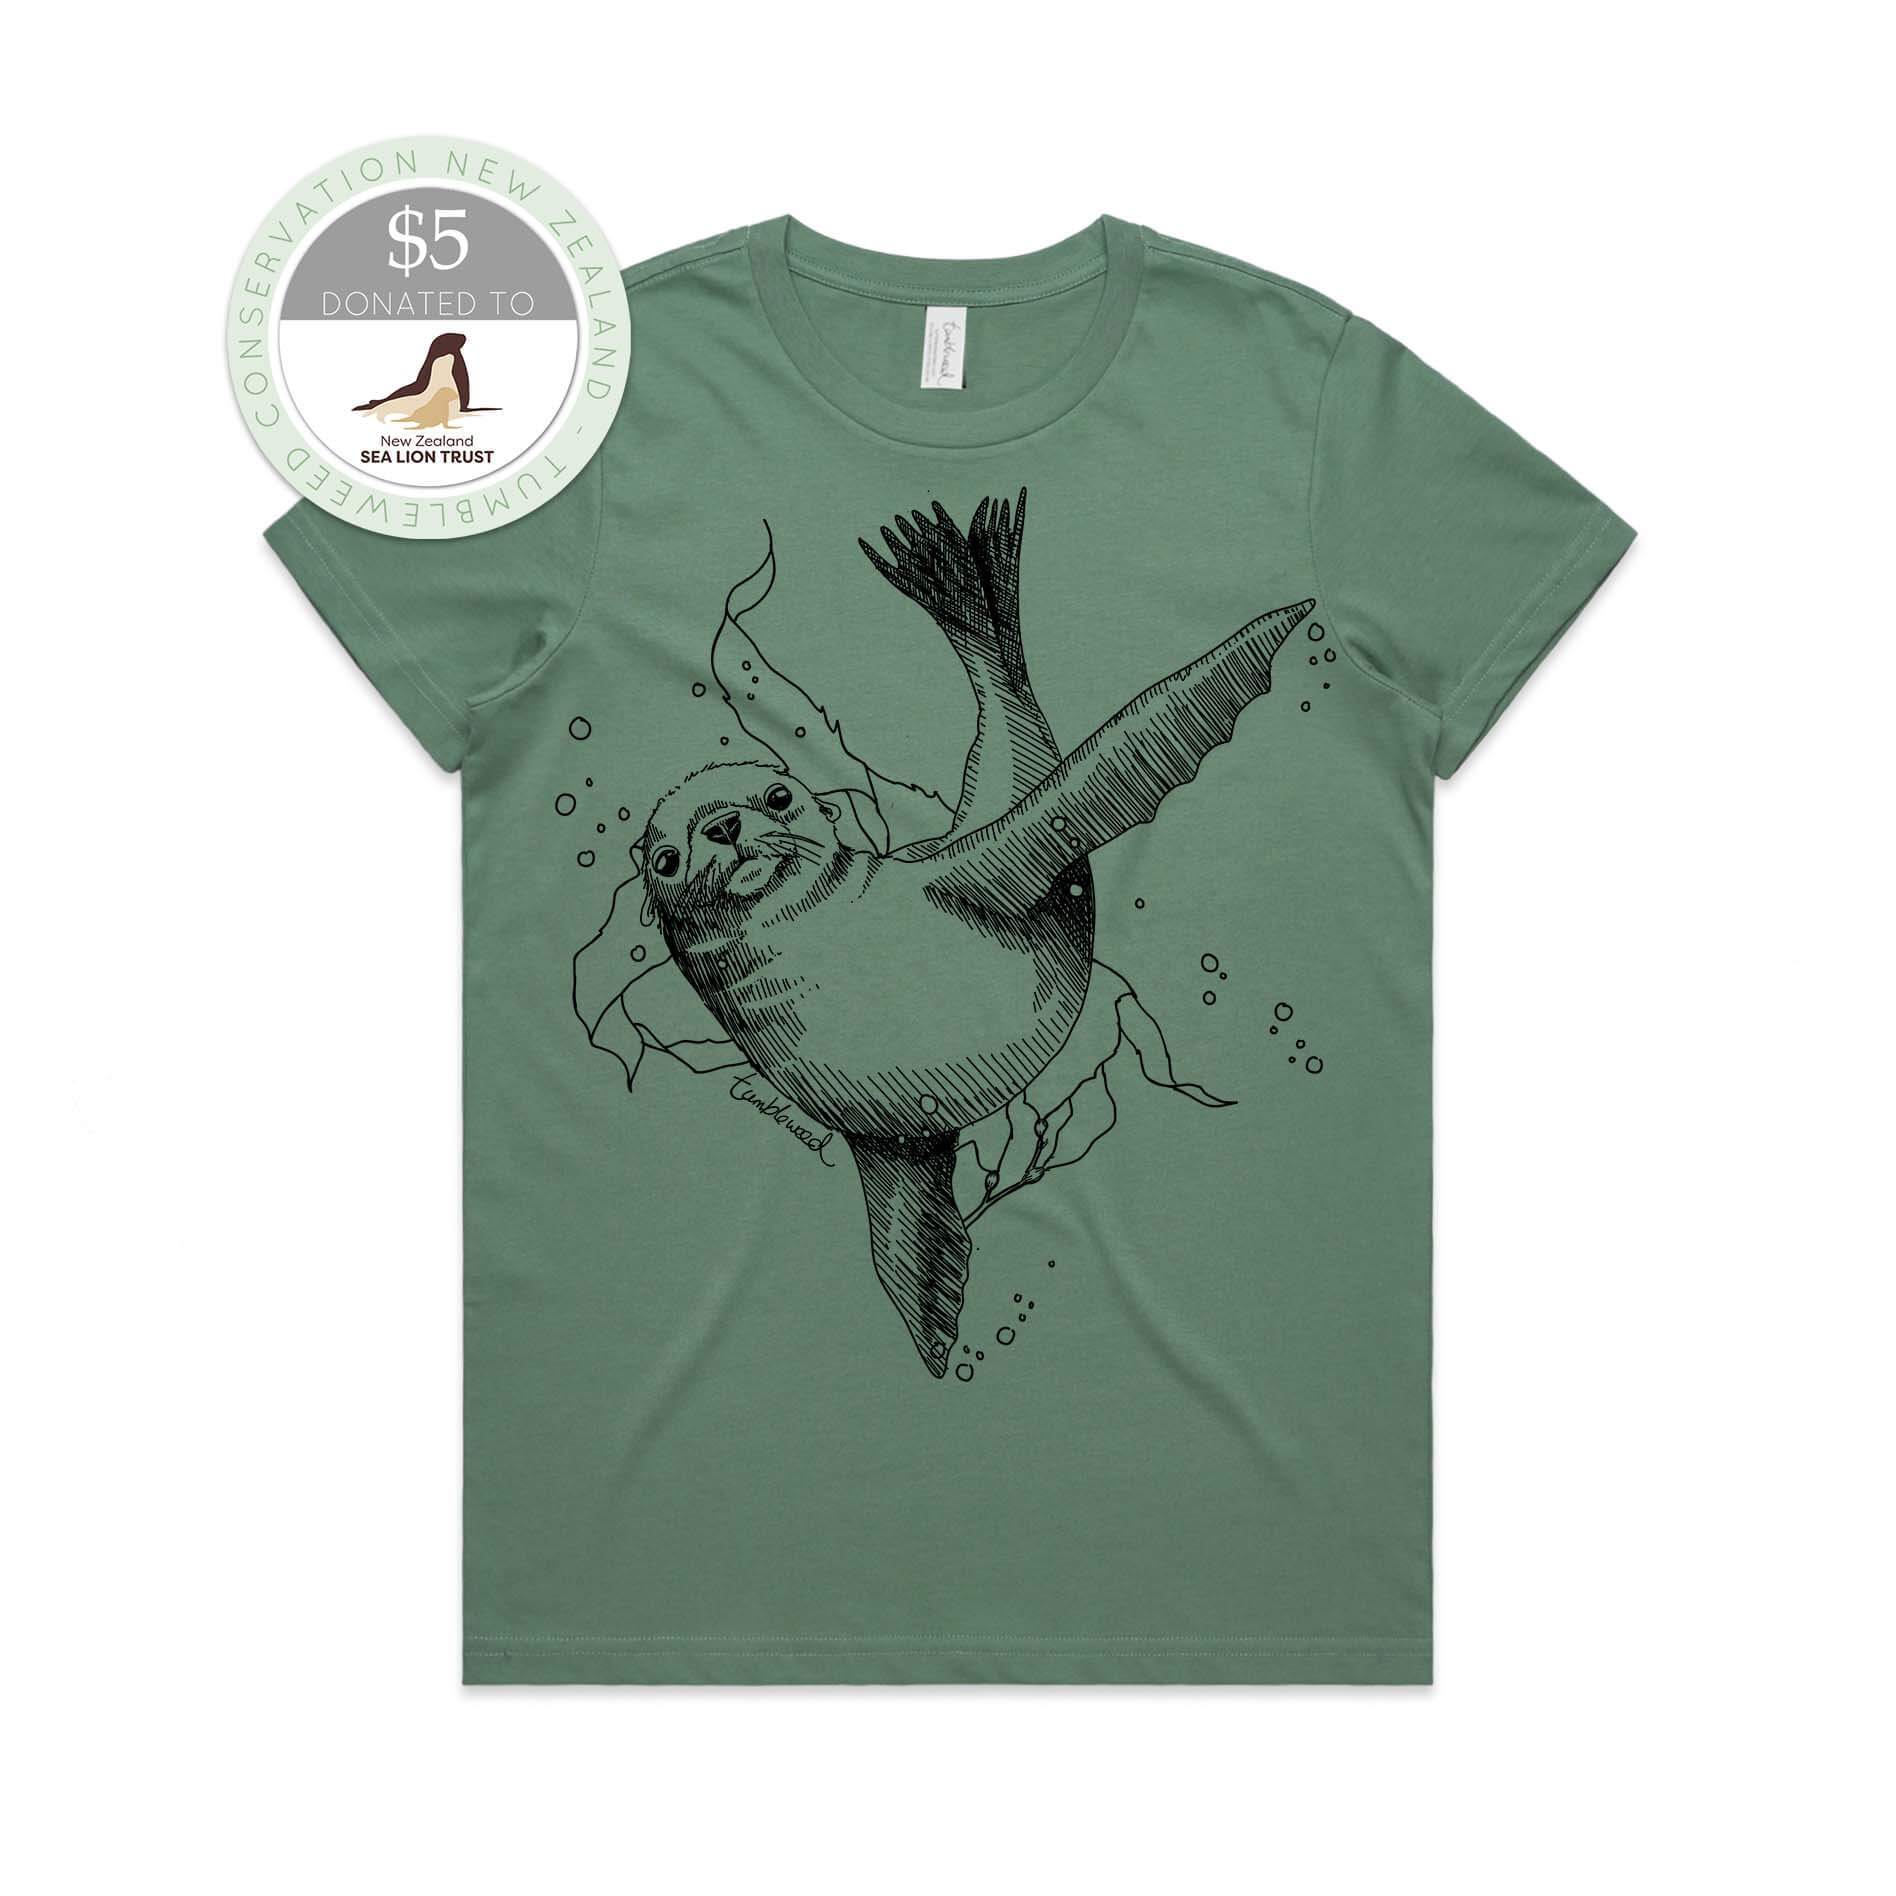 Grey, female t-shirt featuring a screen printed New Zealand sea lion design.